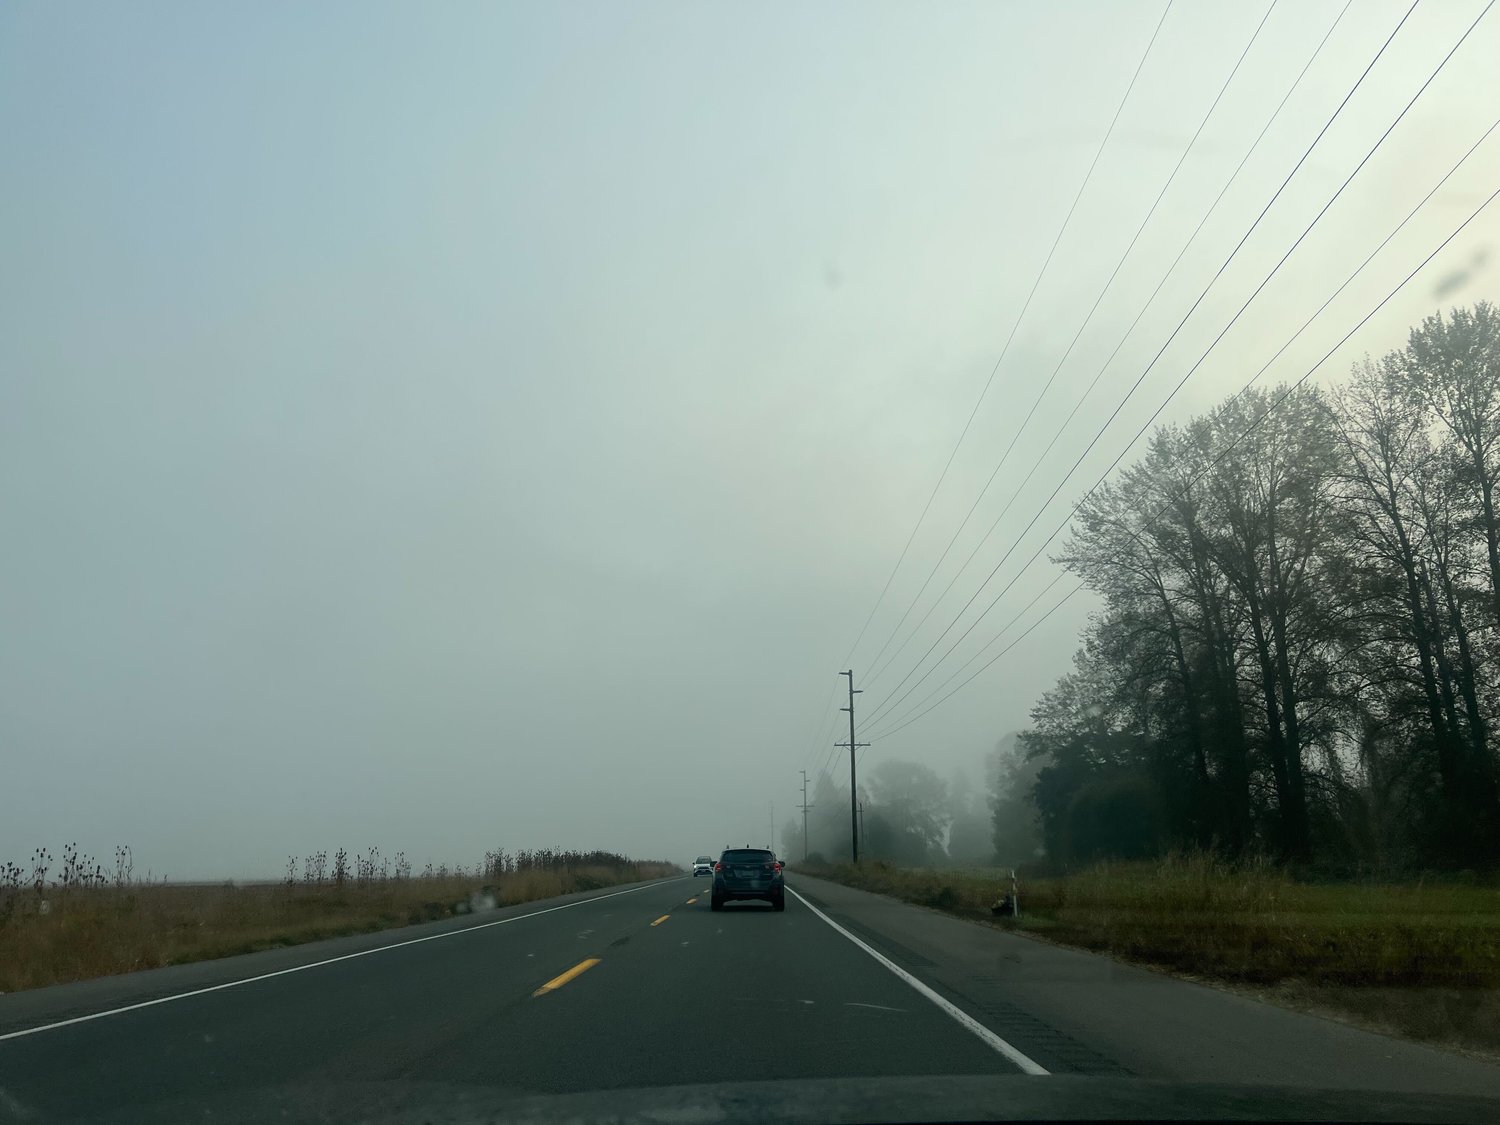 Morning fog settles underneath wildfire smoke in Chehalis on Wednesday morning, causing whiteout conditions.